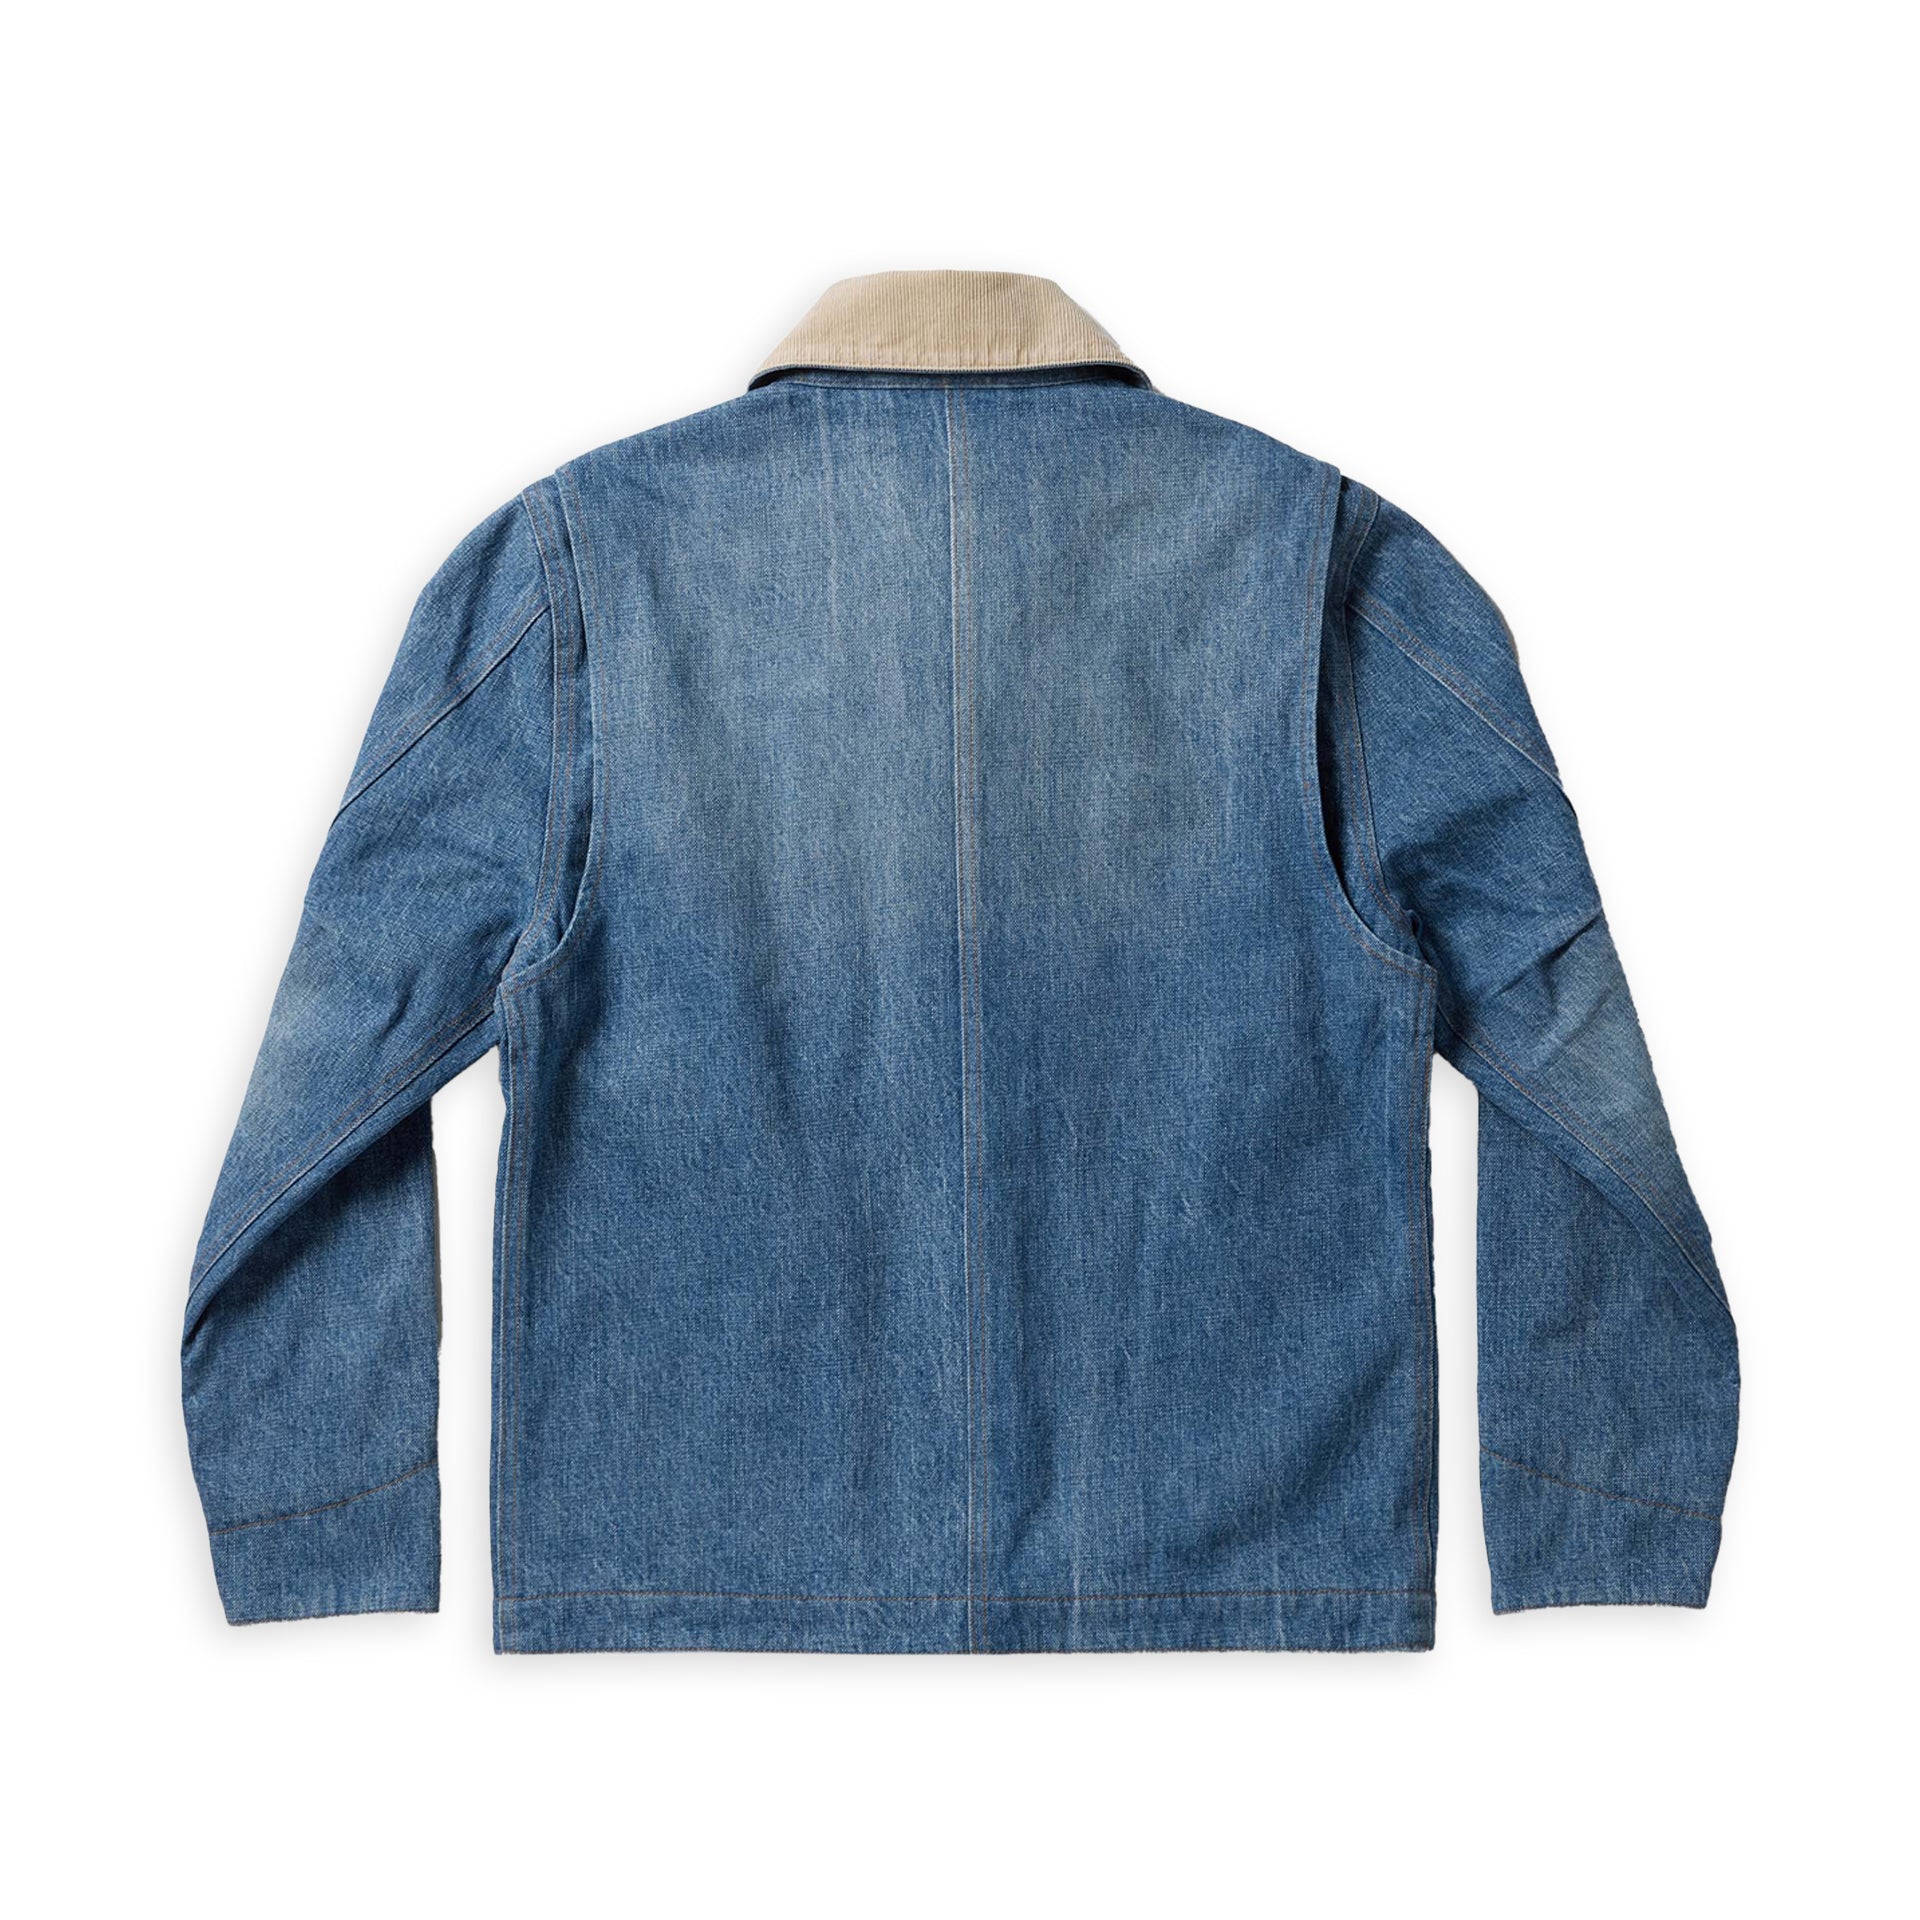 Taylor Stitch Selvage Workhorse Jacket Uncrate Supply 